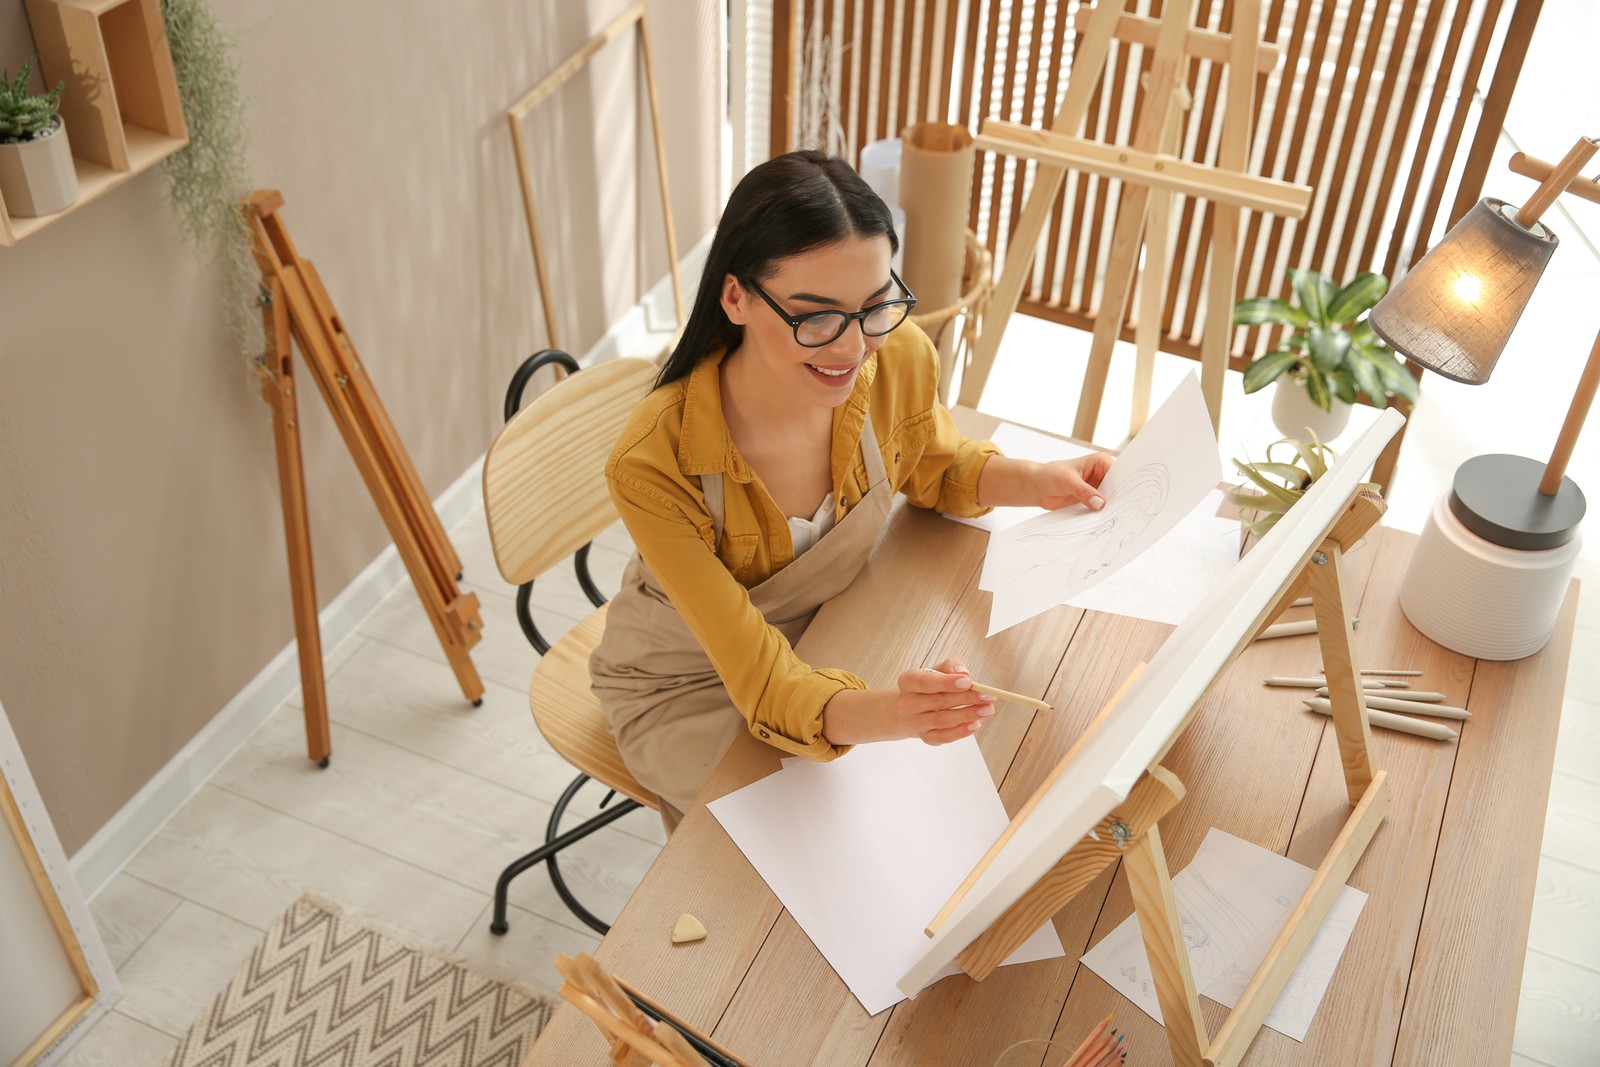 Photo of young woman drawing on easel with pencil at table indoors, above view